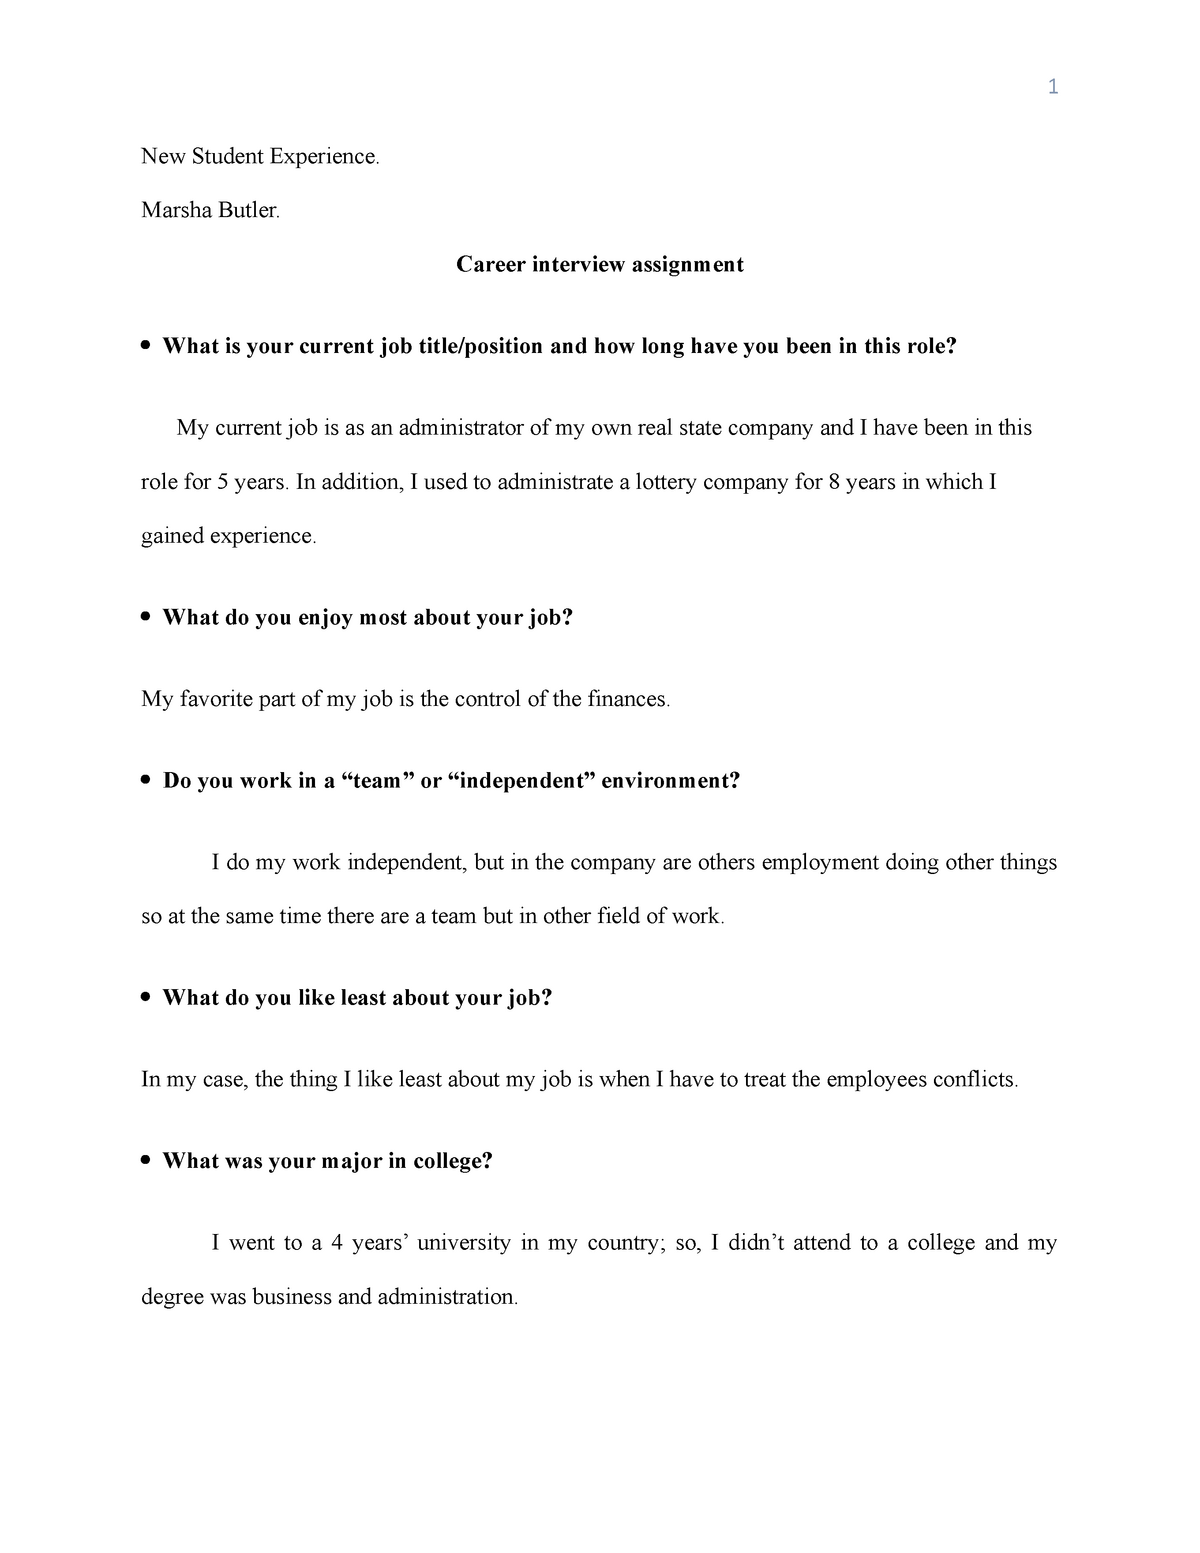 job interview assignment for students